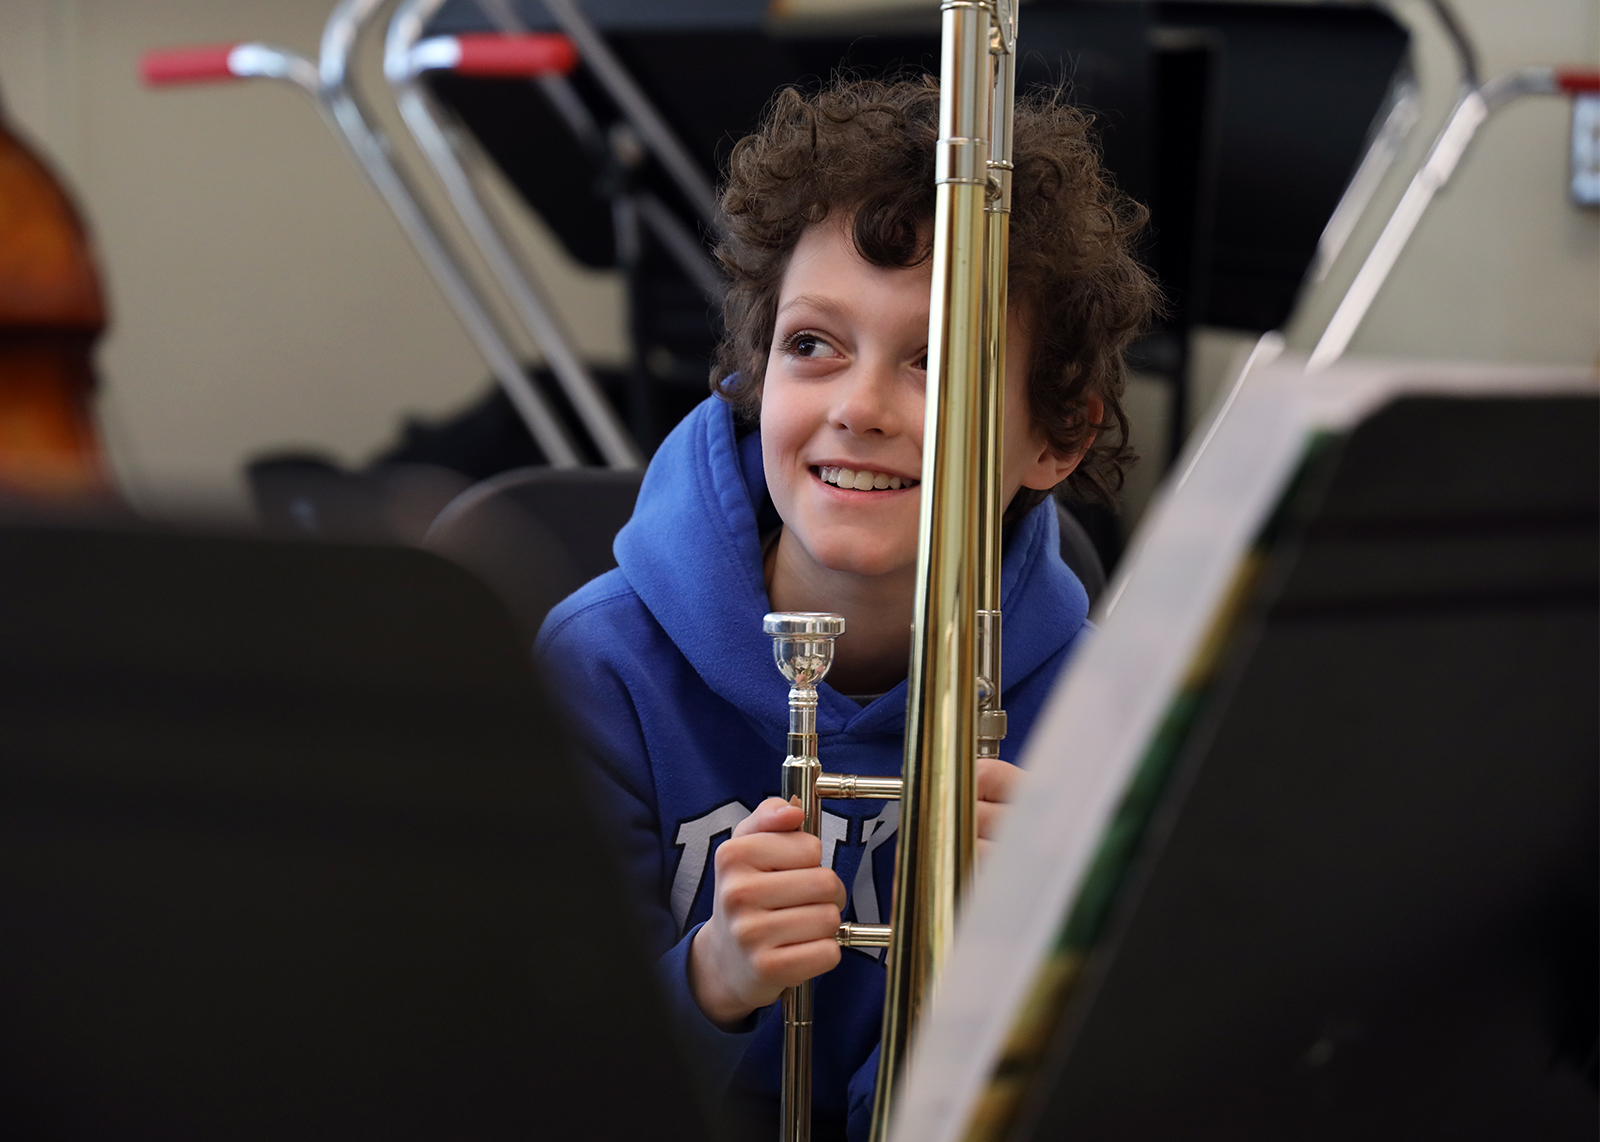 student holding trumpet smiling